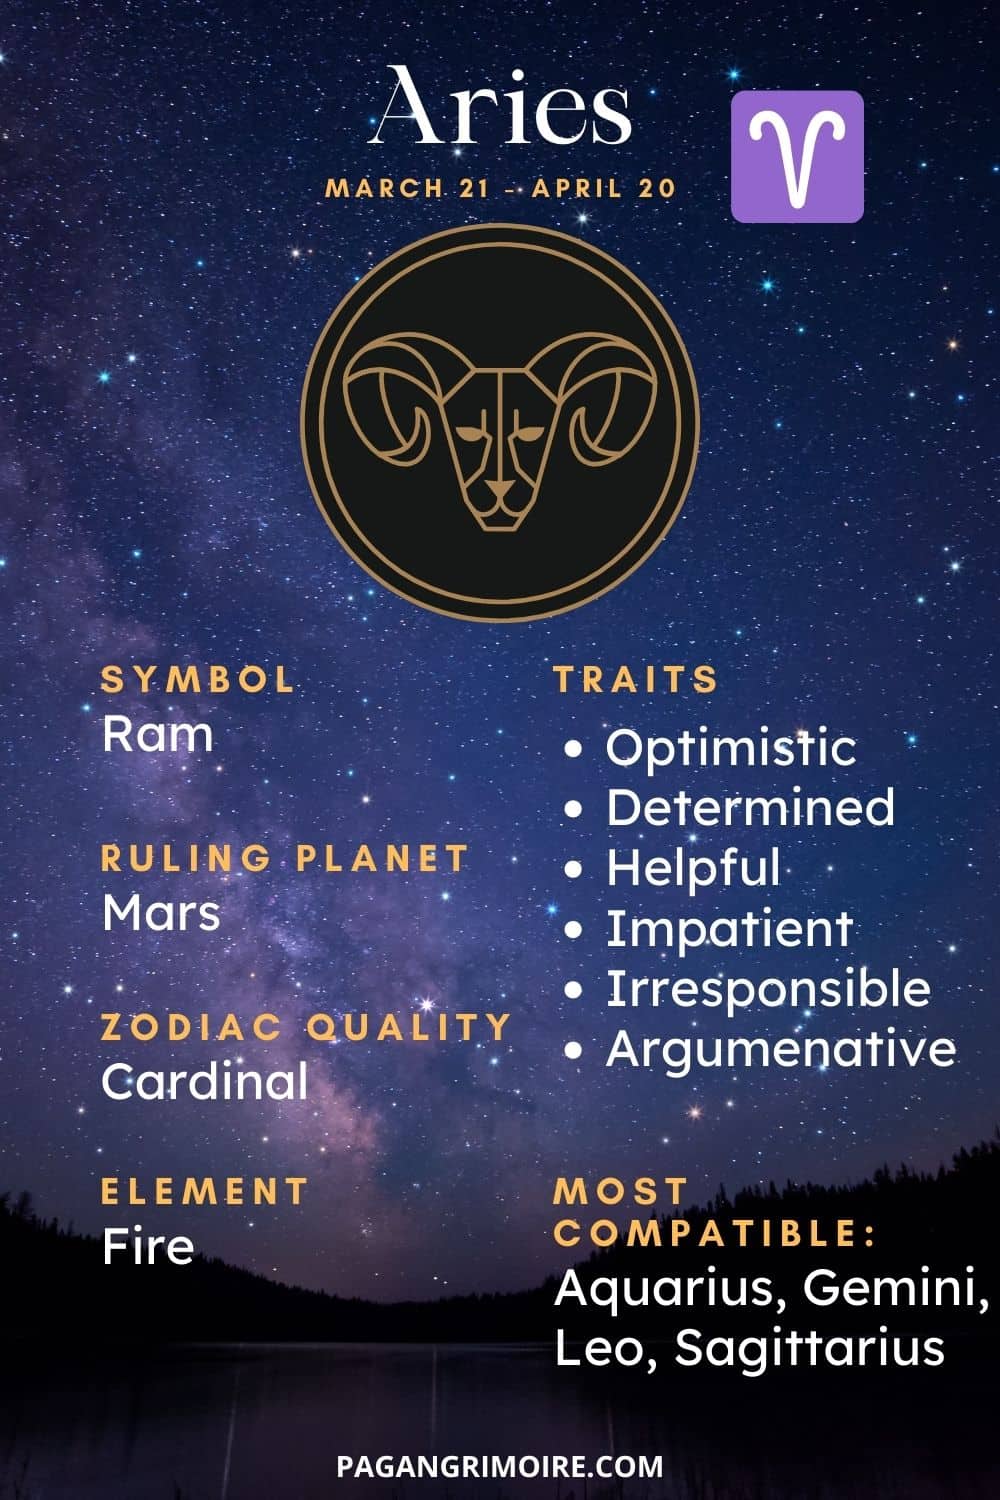 The Aries Symbol and Its Meaning in Astrology | The Pagan Grimoire